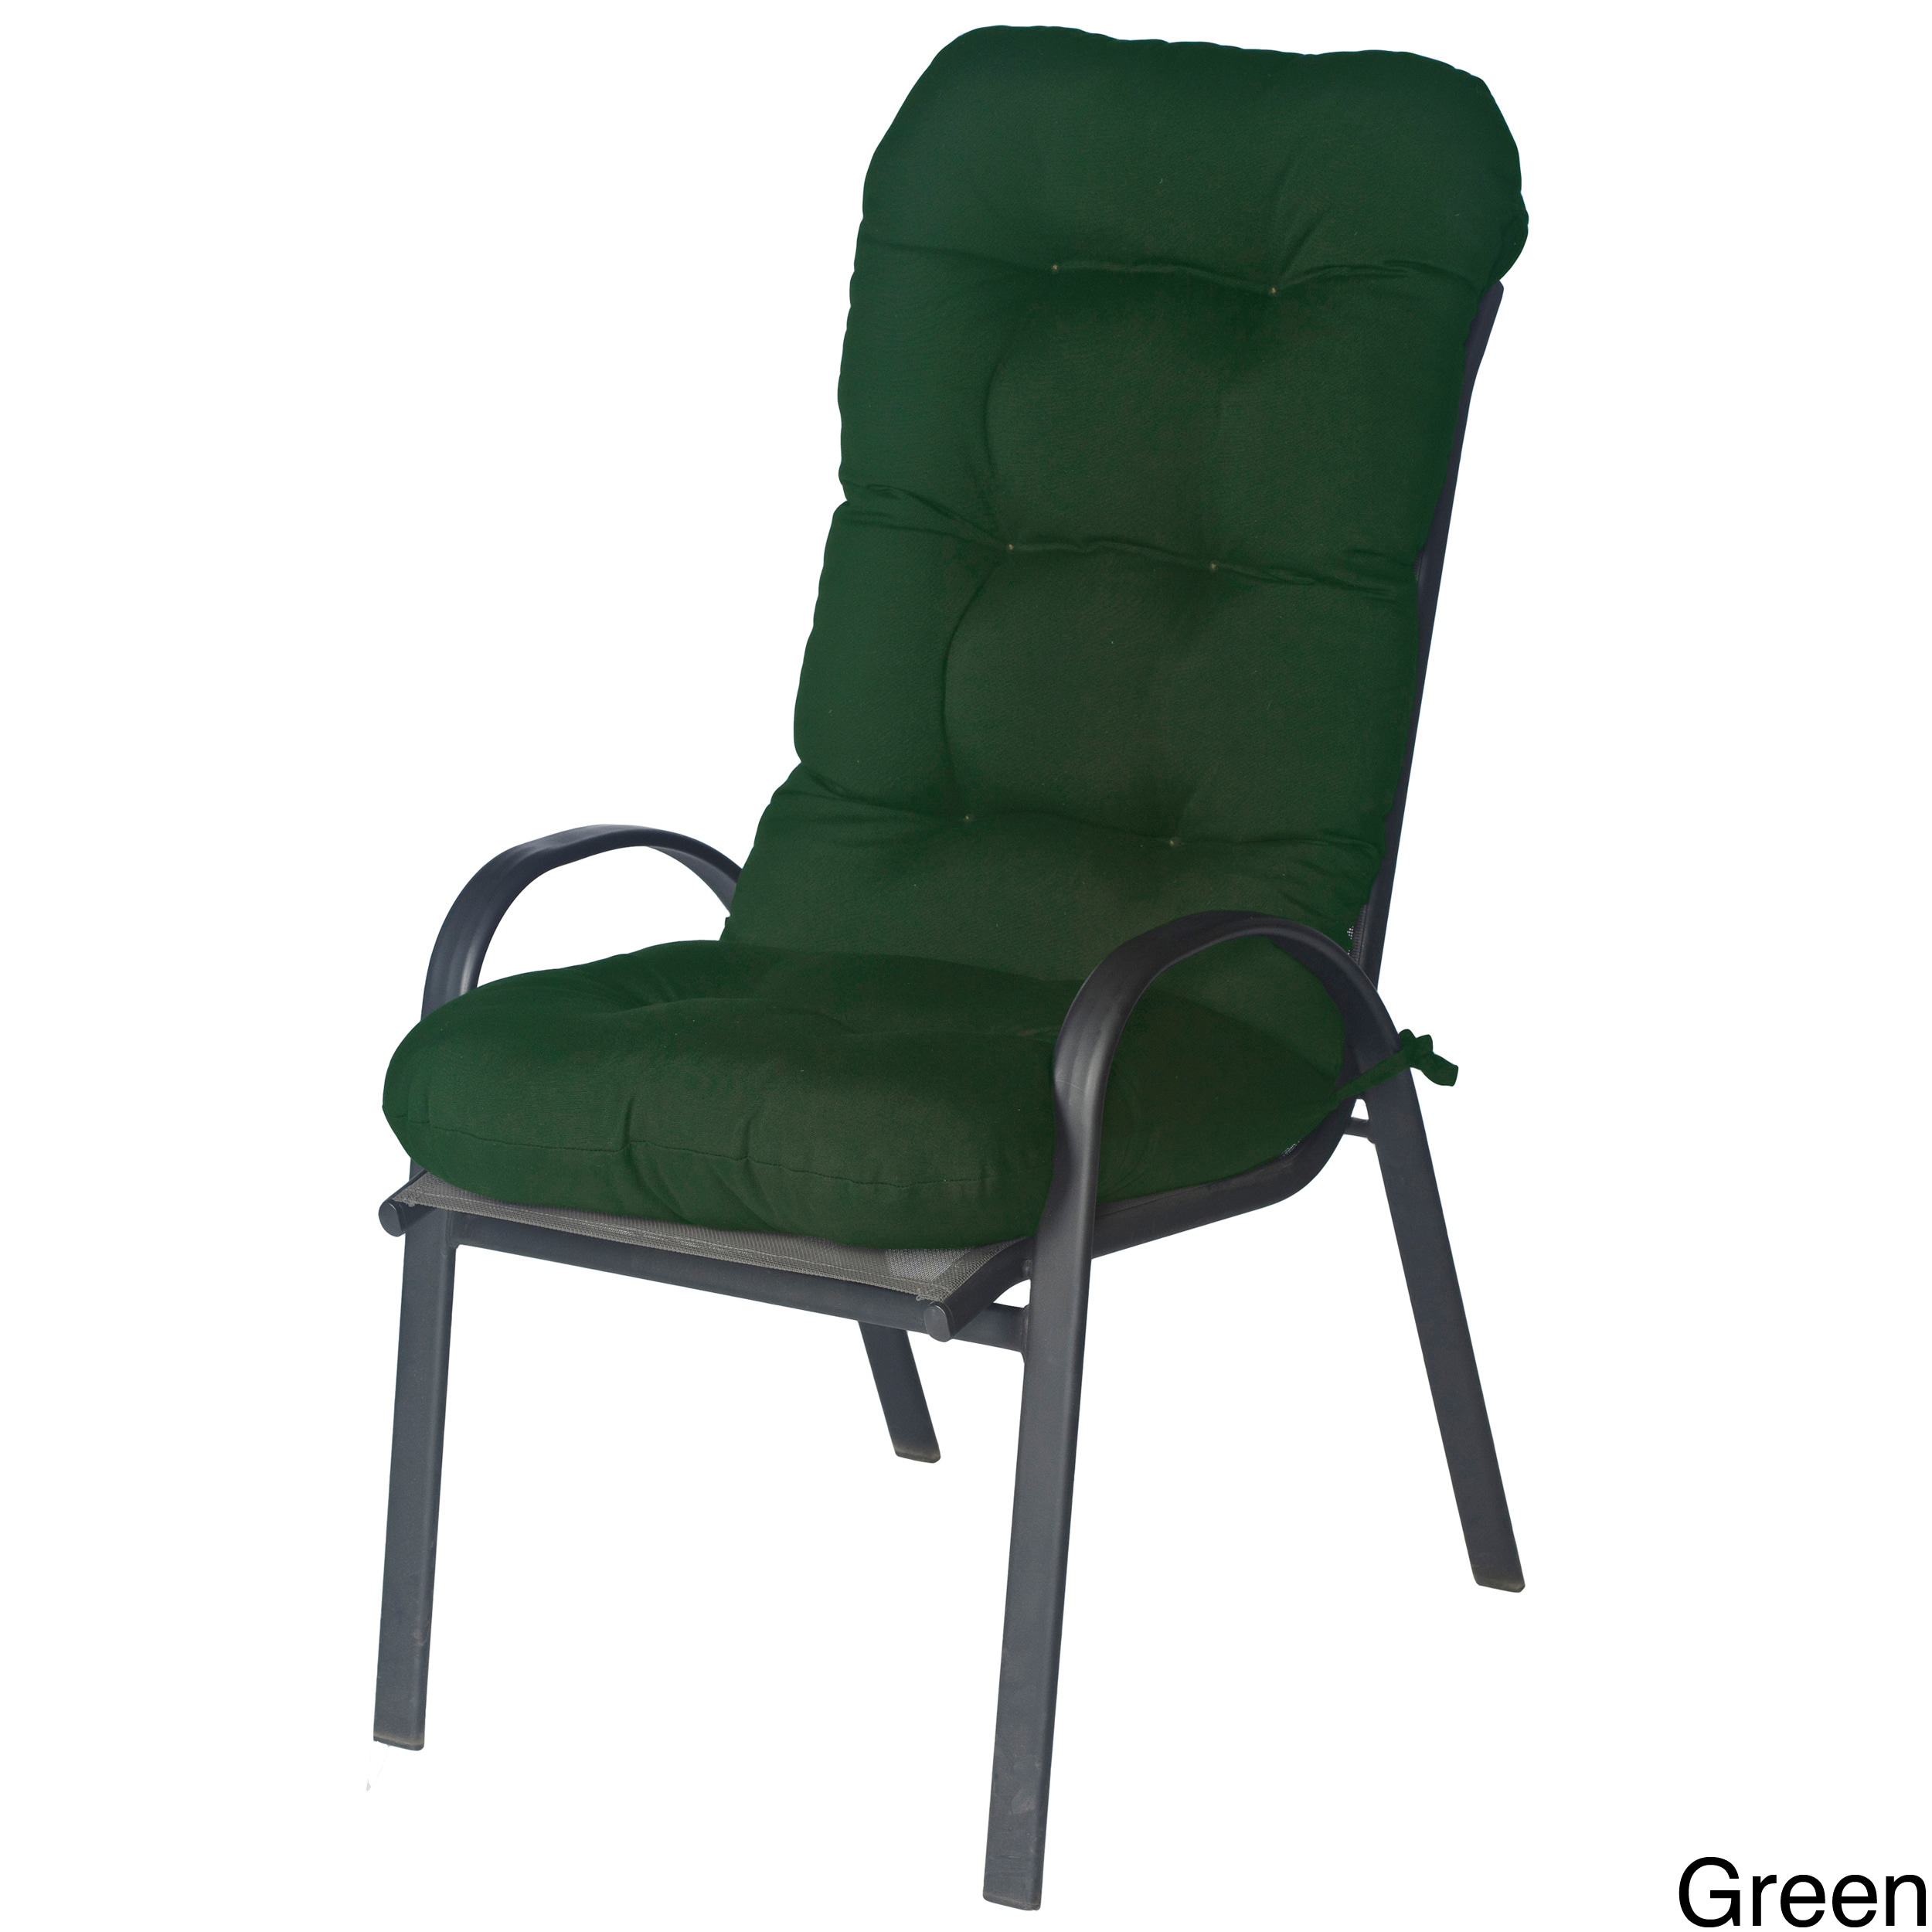 https://ak1.ostkcdn.com/images/products/7711030/7711030/Outdoor-All-Weather-Fabric-Chair-Cushion-L15116655.jpg